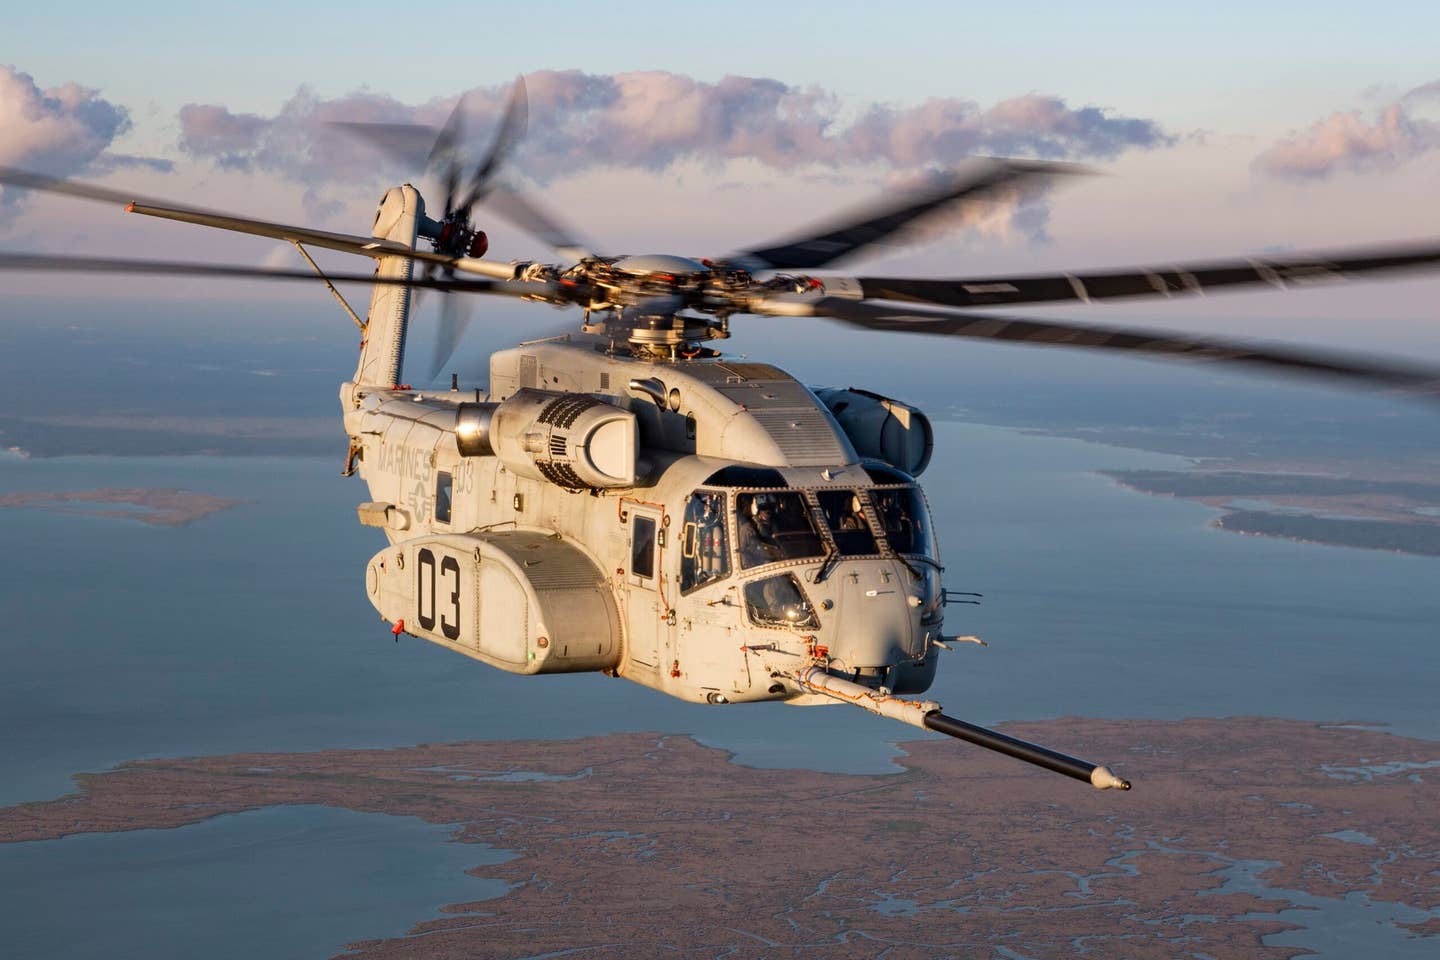 CH-53K First Night Air to Air Refueling, June 23, 2021, NAS Patuxent River, Maryland.<em> Lockheed Martin</em>